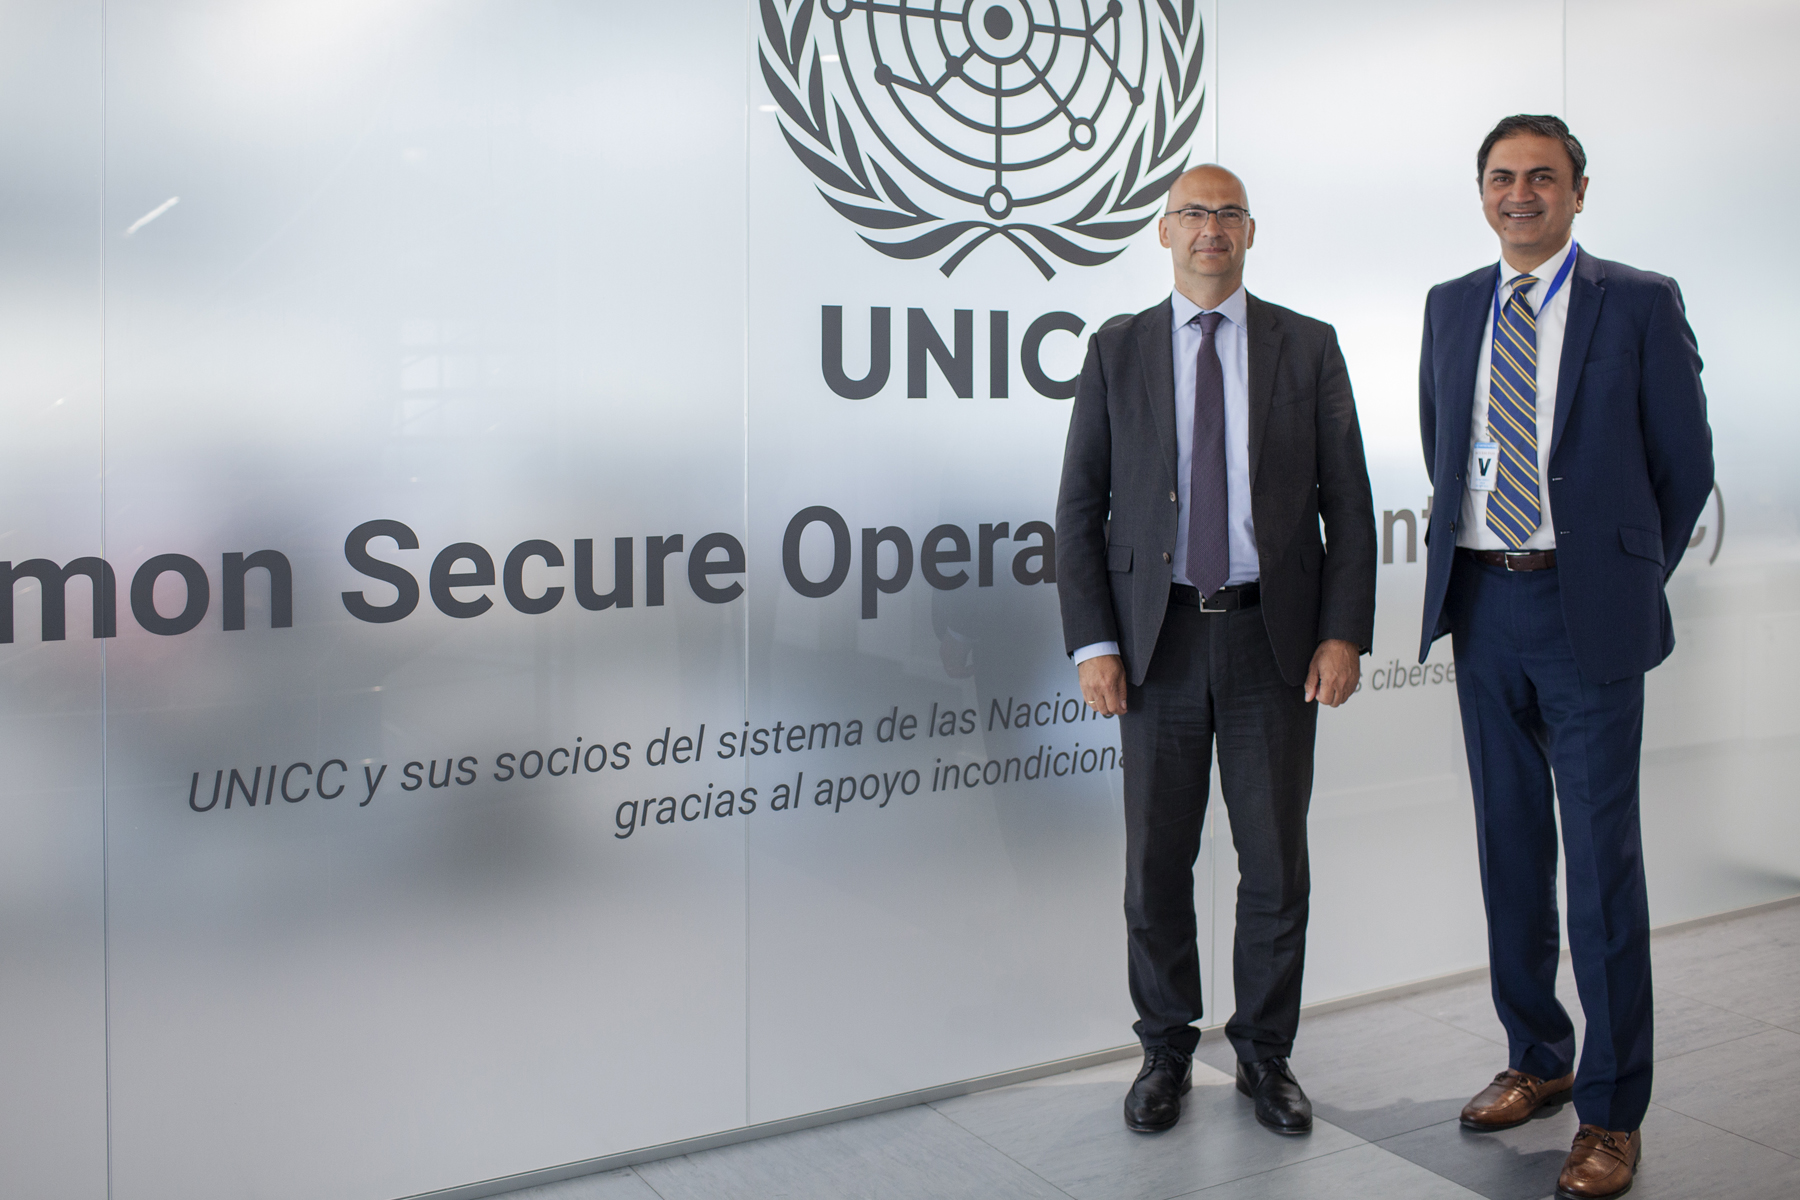 UNICC and FAO Strengthen Partnership through UNICC’s Cybersecurity Centre…